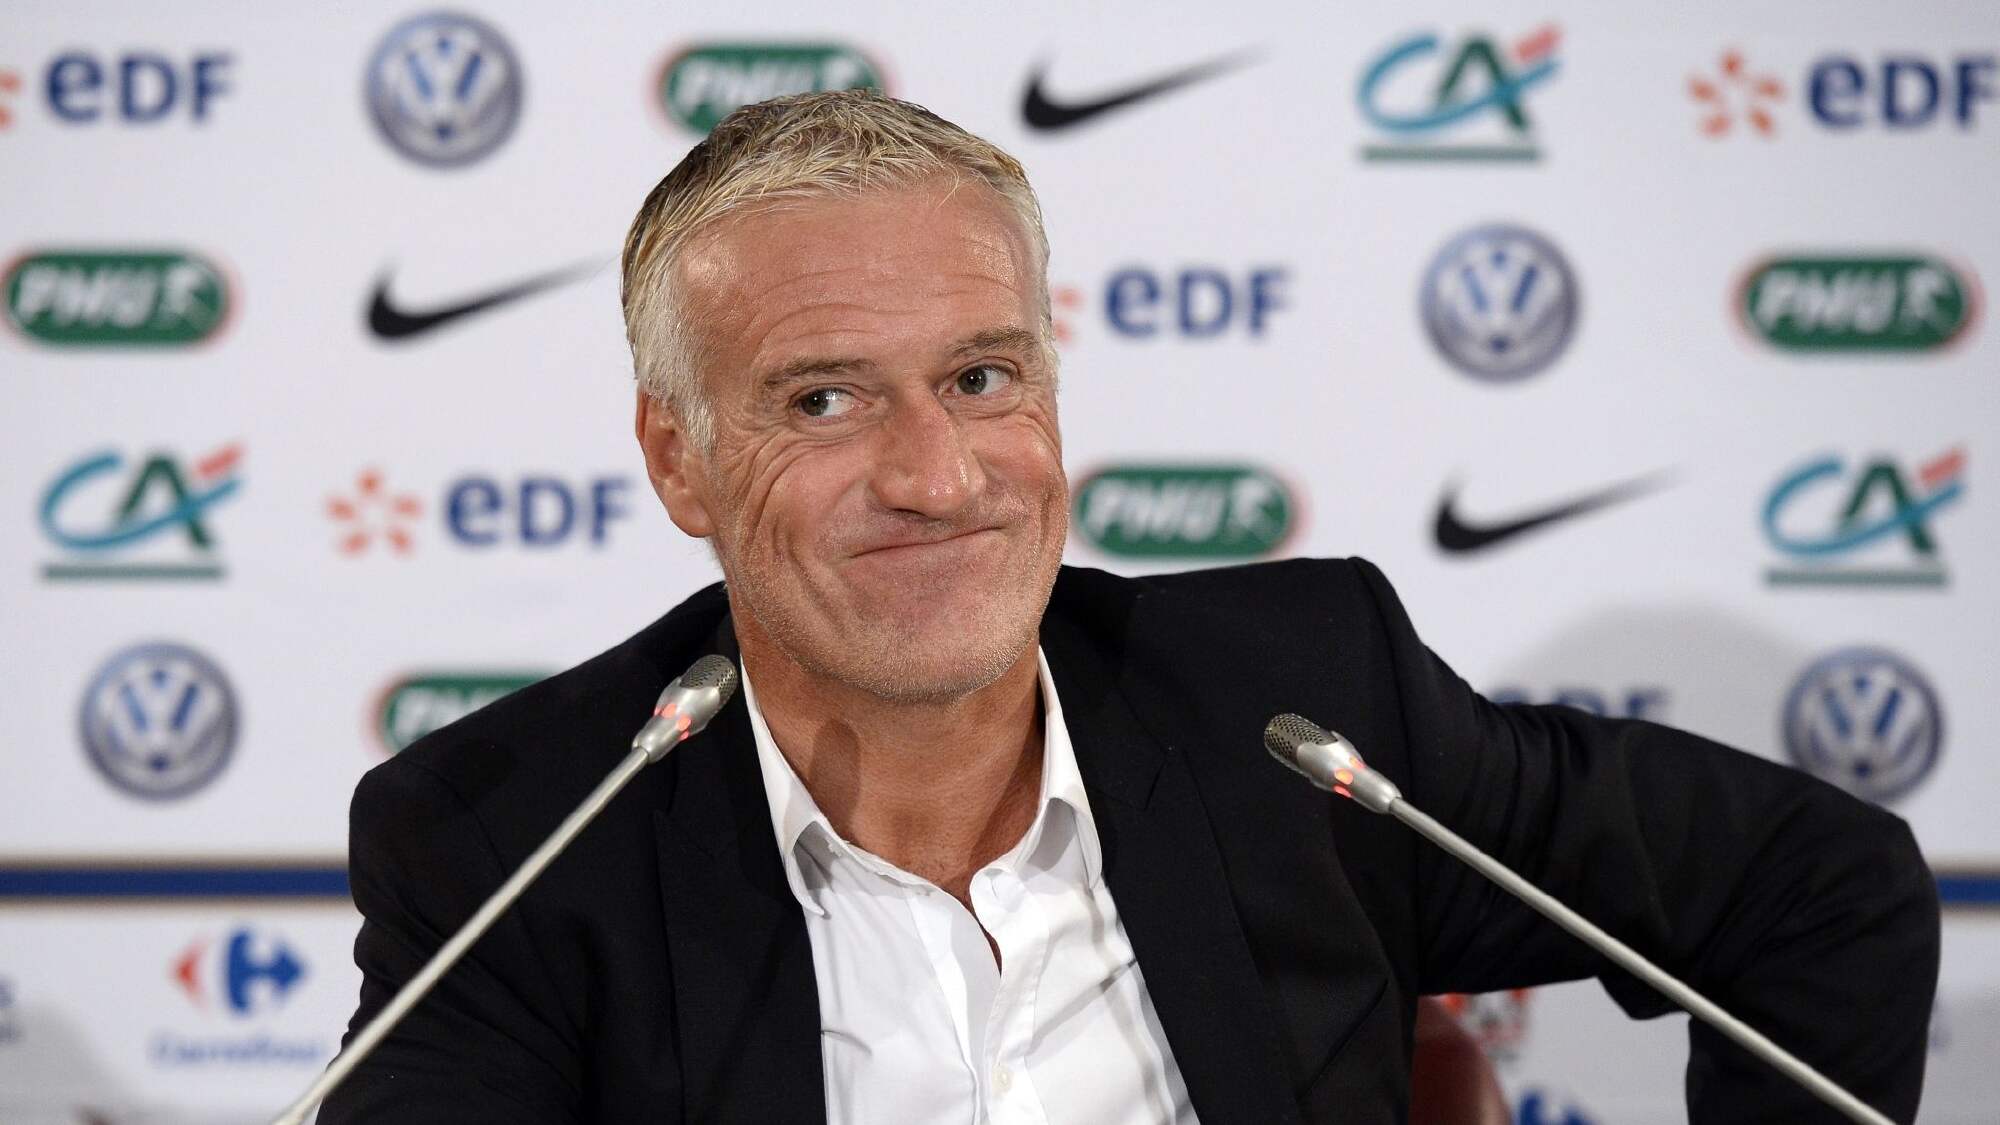 Some French people are hoping that Messi wins the World Cup - Didier Deschamps